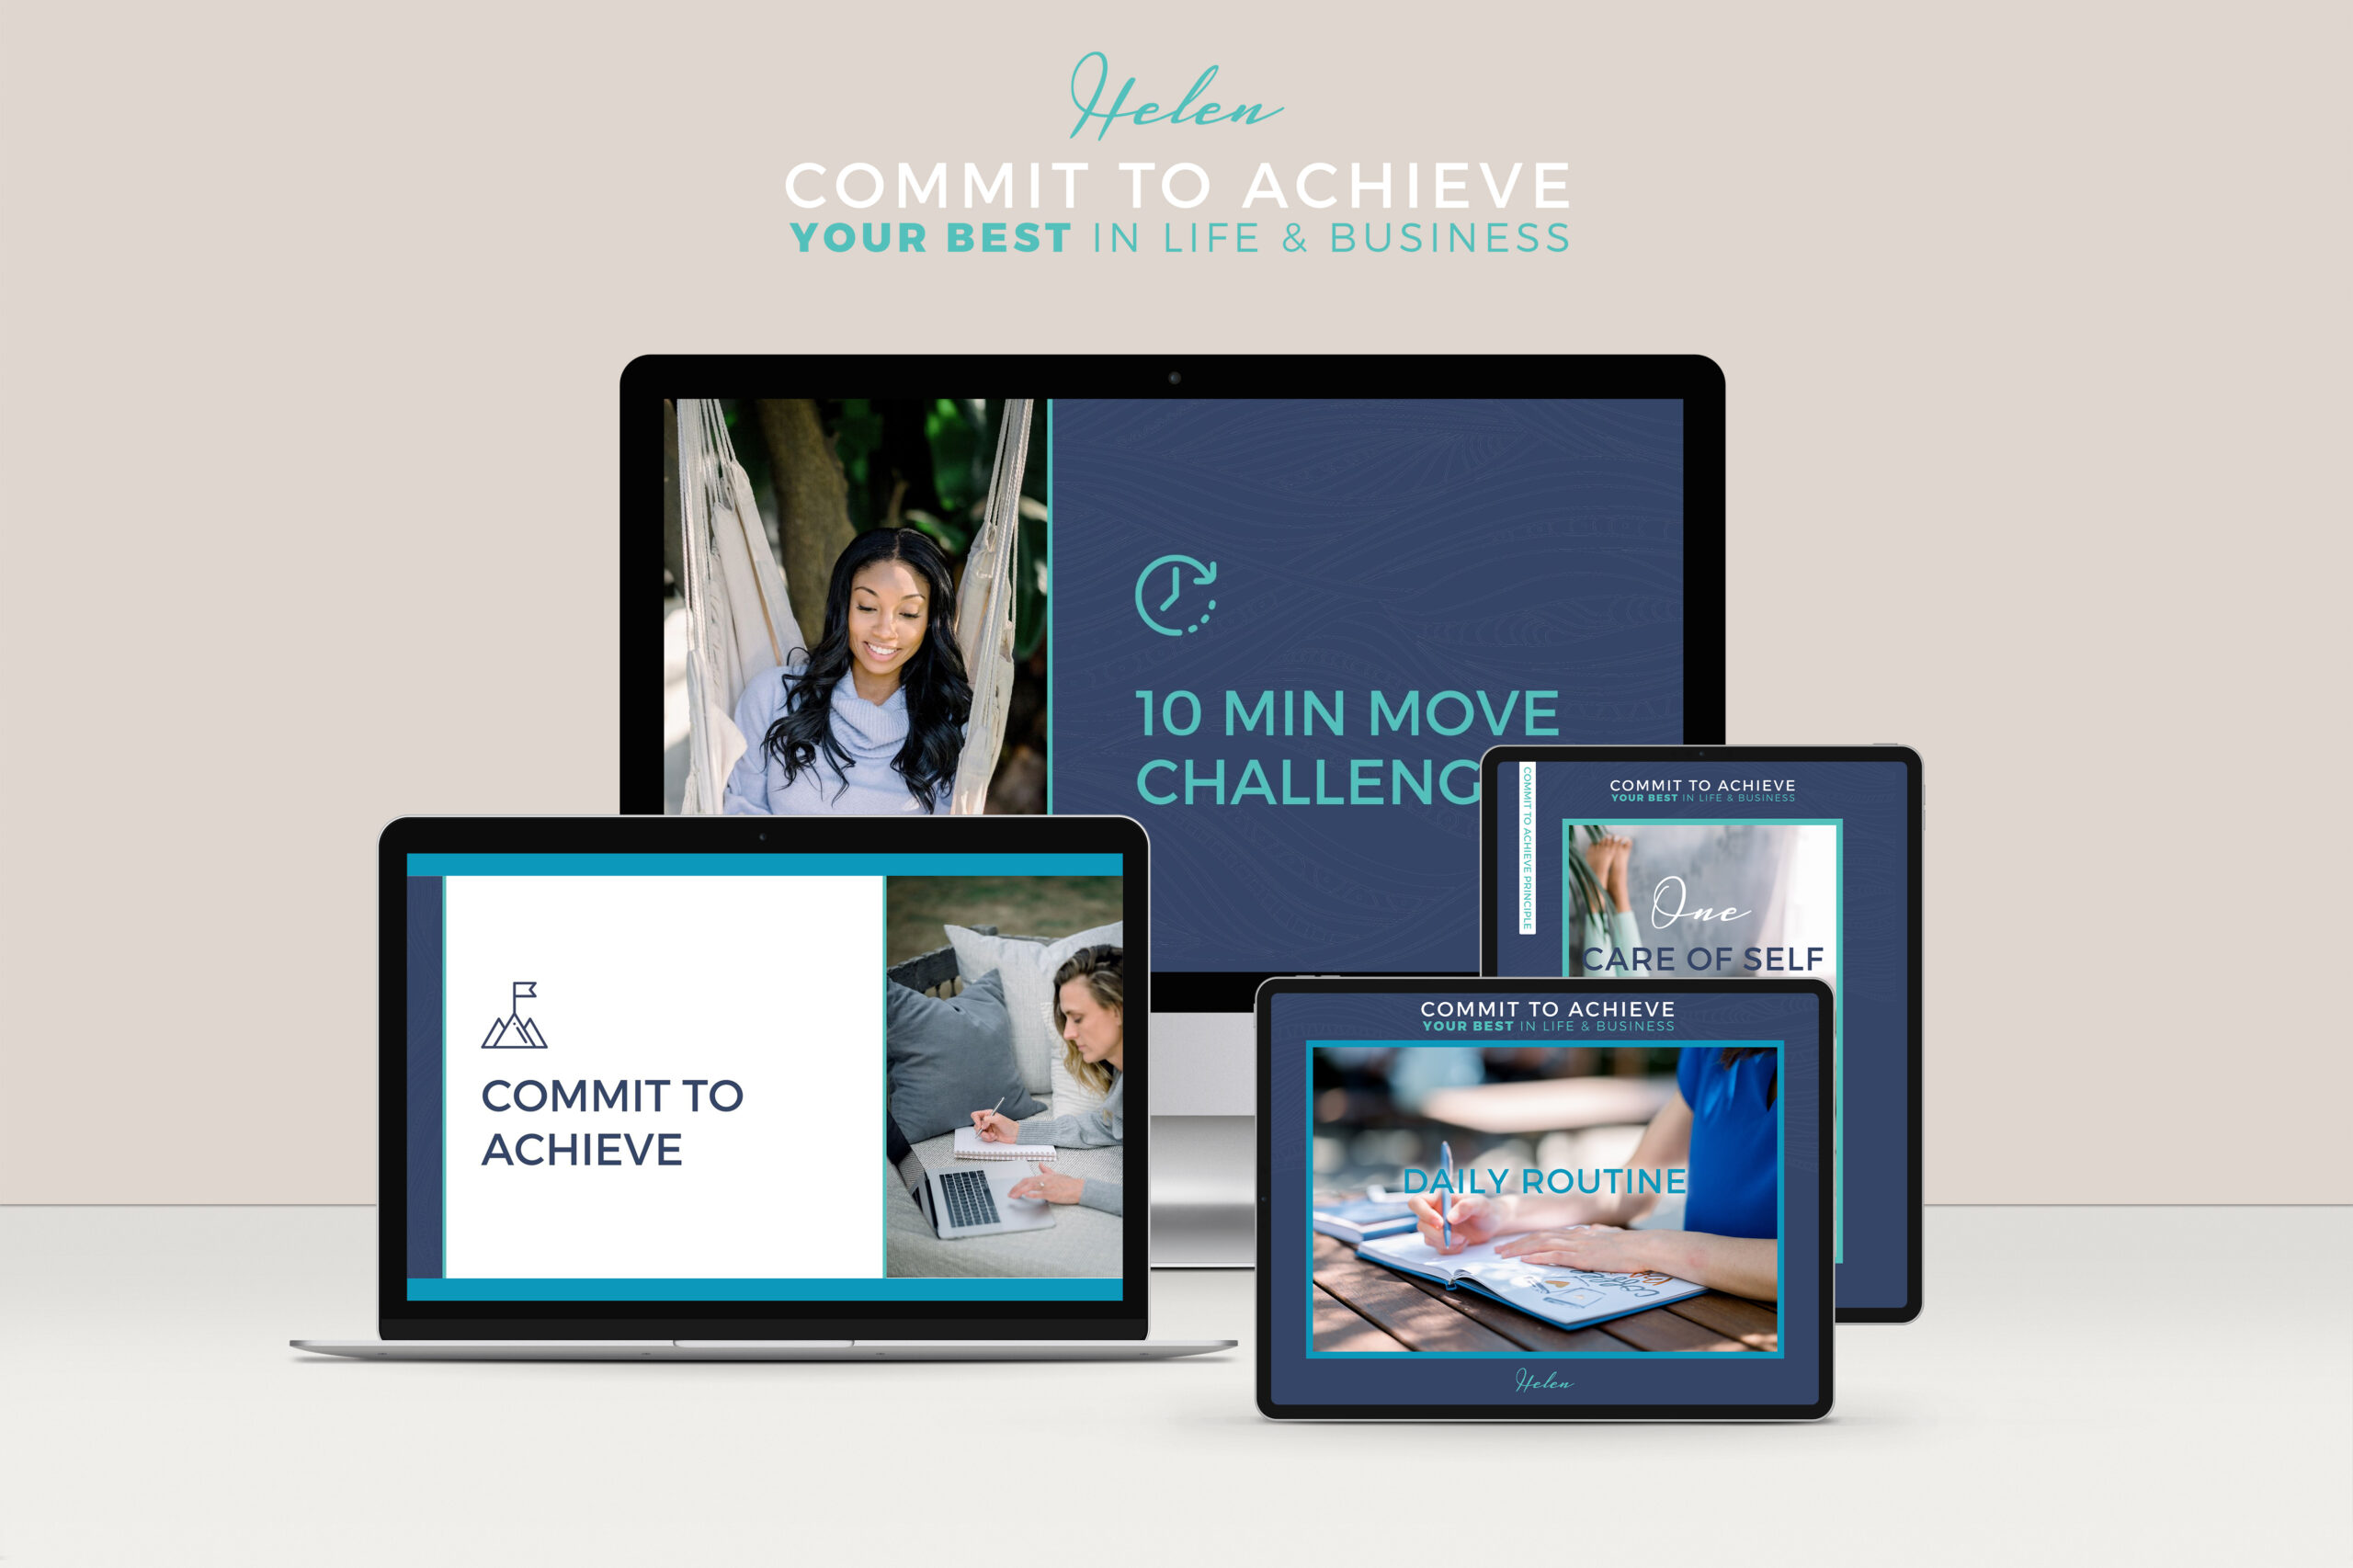 Commit to Achieve online course